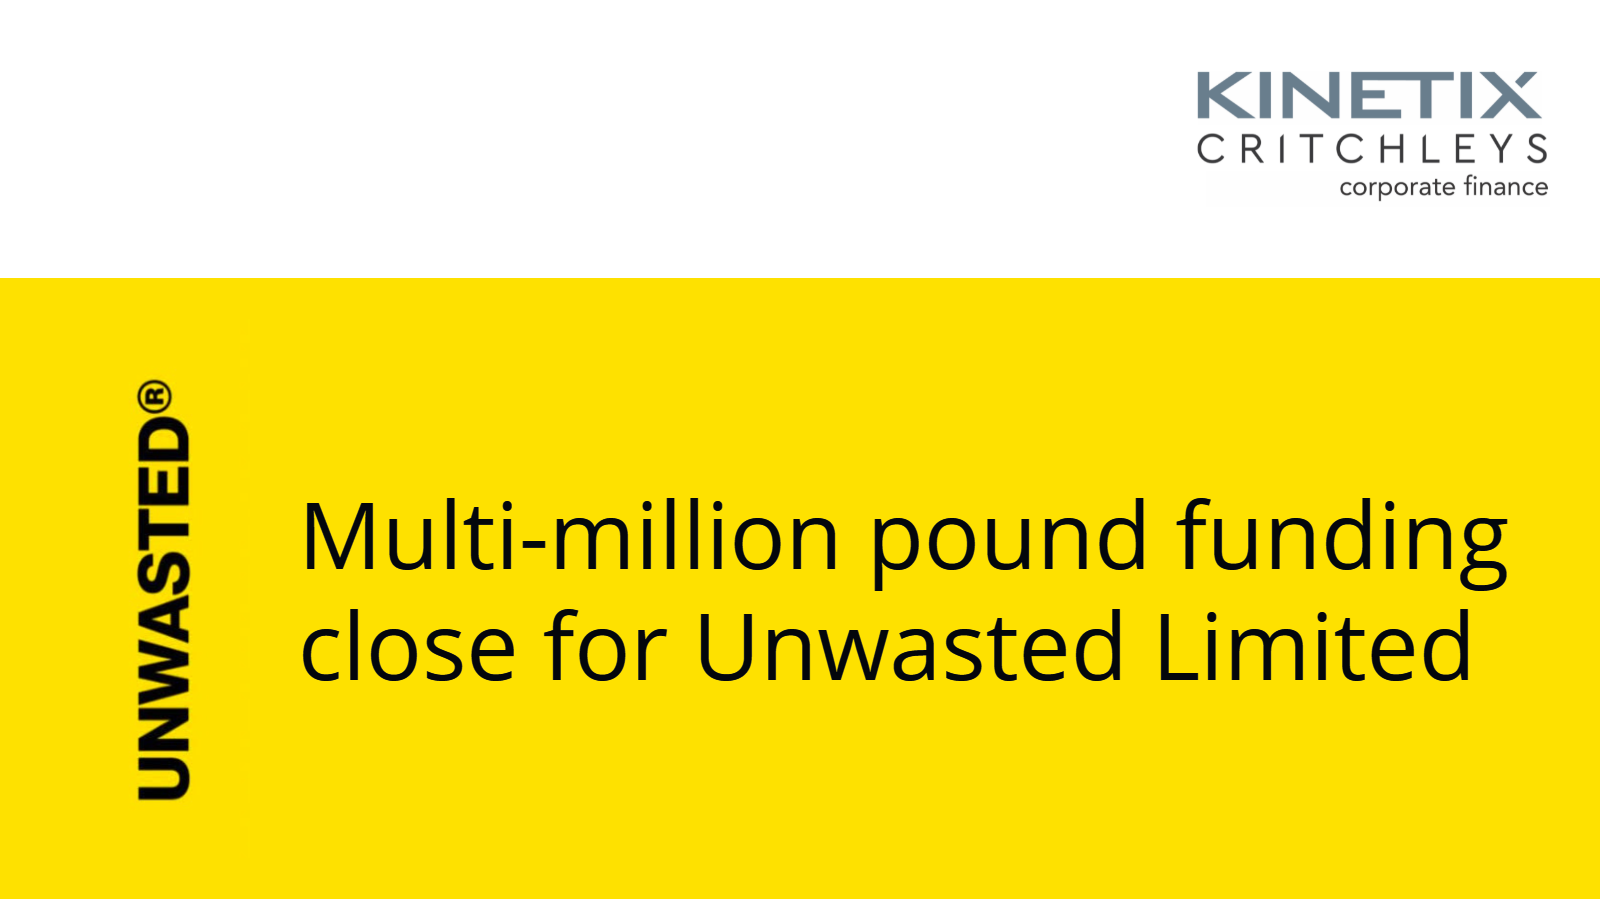 Multi-million pound funding close for Unwasted Limited